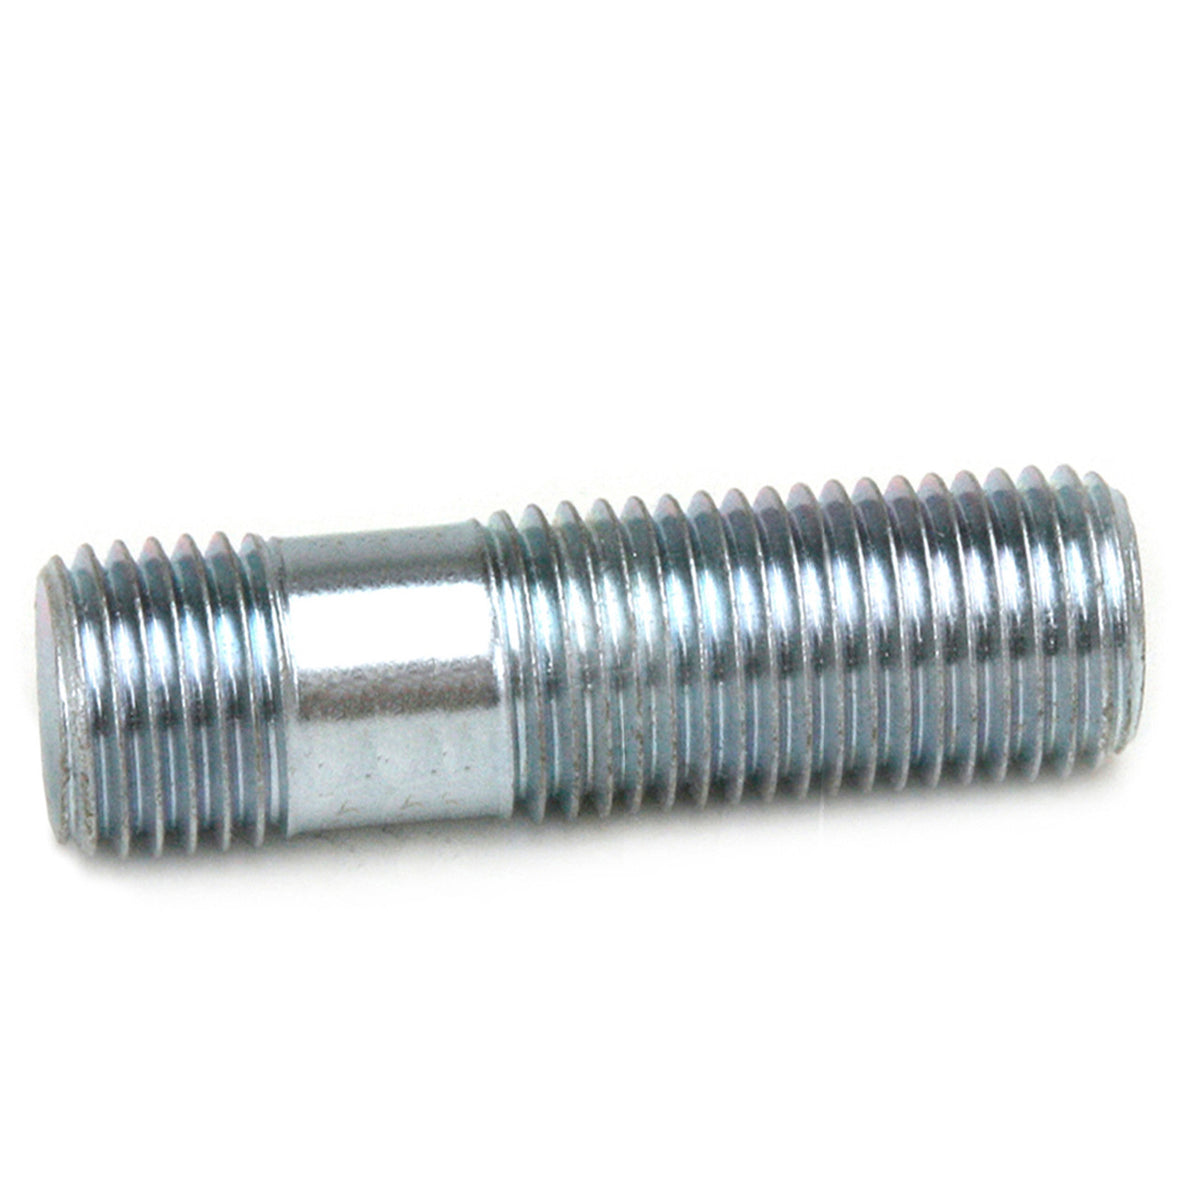 Wheel Stud 14mm X 1.5 Thread Pitch 2.125" Overall Length, 10 Pack